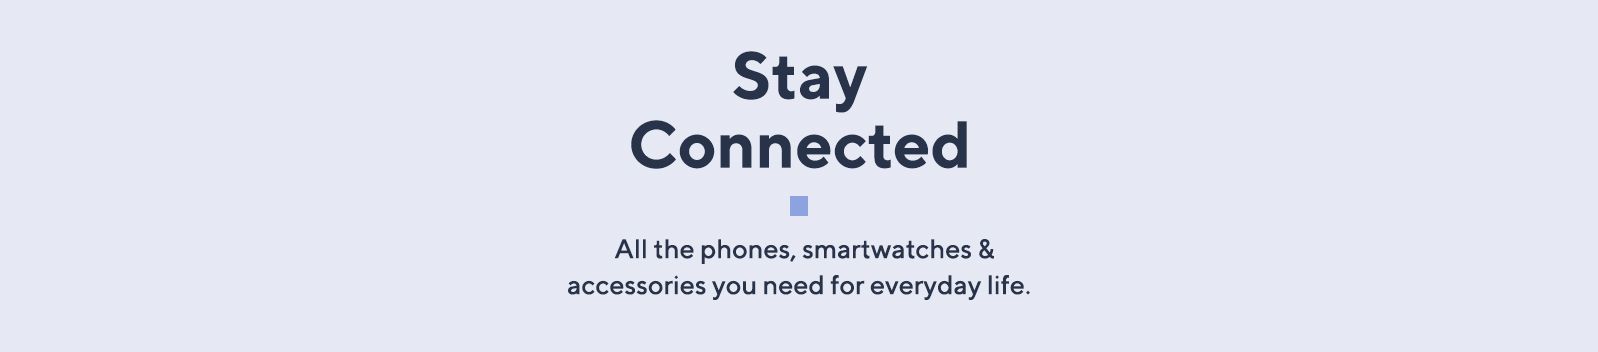 Stay connected: All the phones, smartwatches & accessories you need for everyday life.  